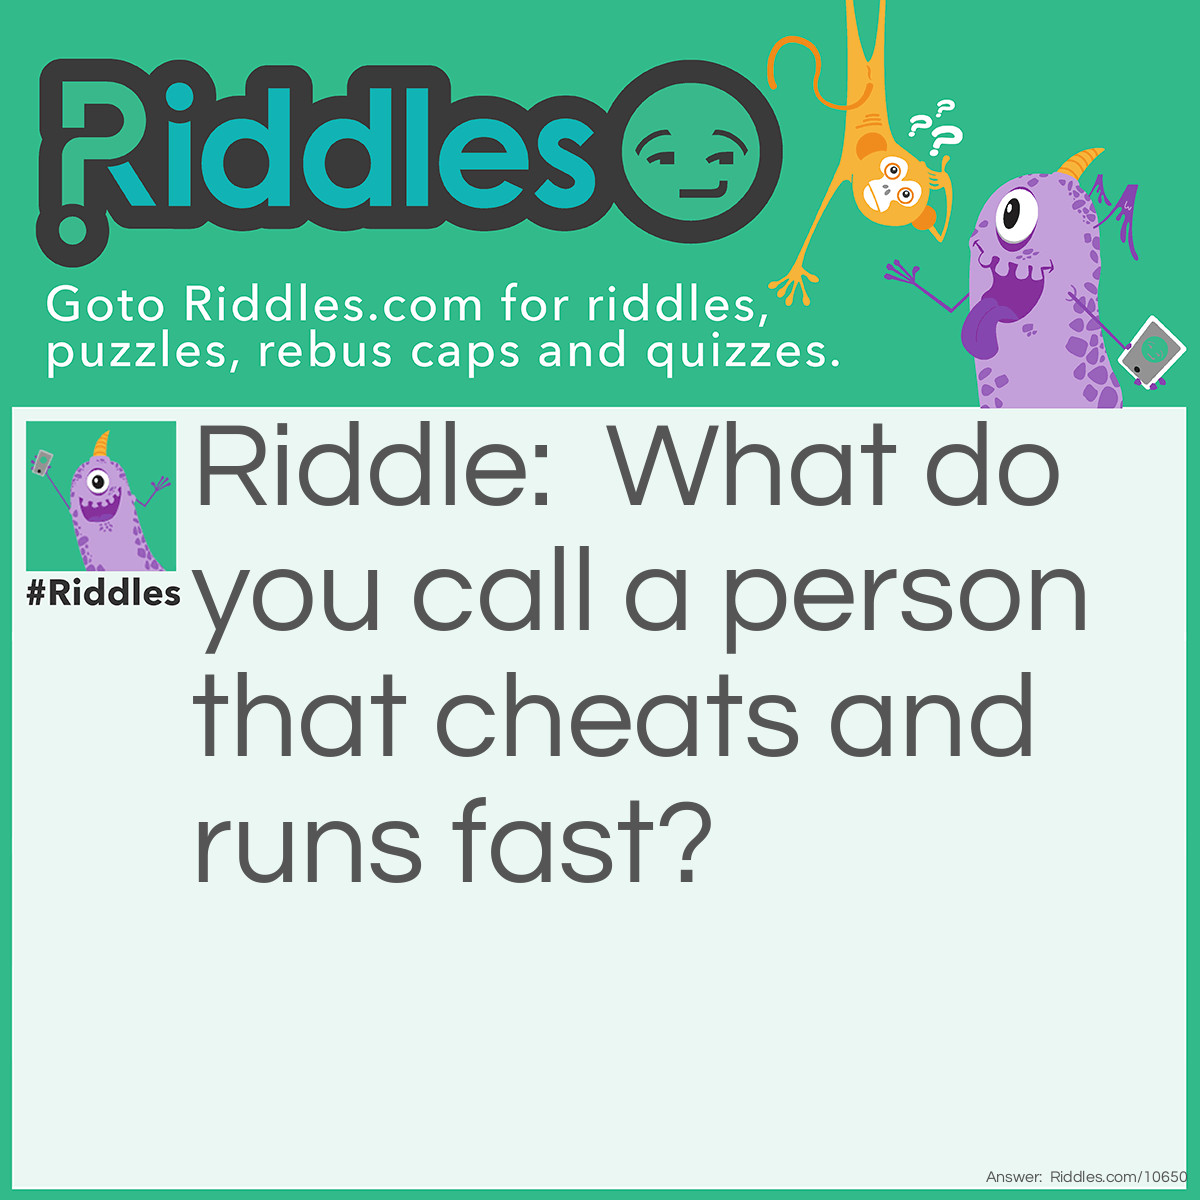 Riddle: What do you call a person that cheats and runs fast? Answer: A cheetah.